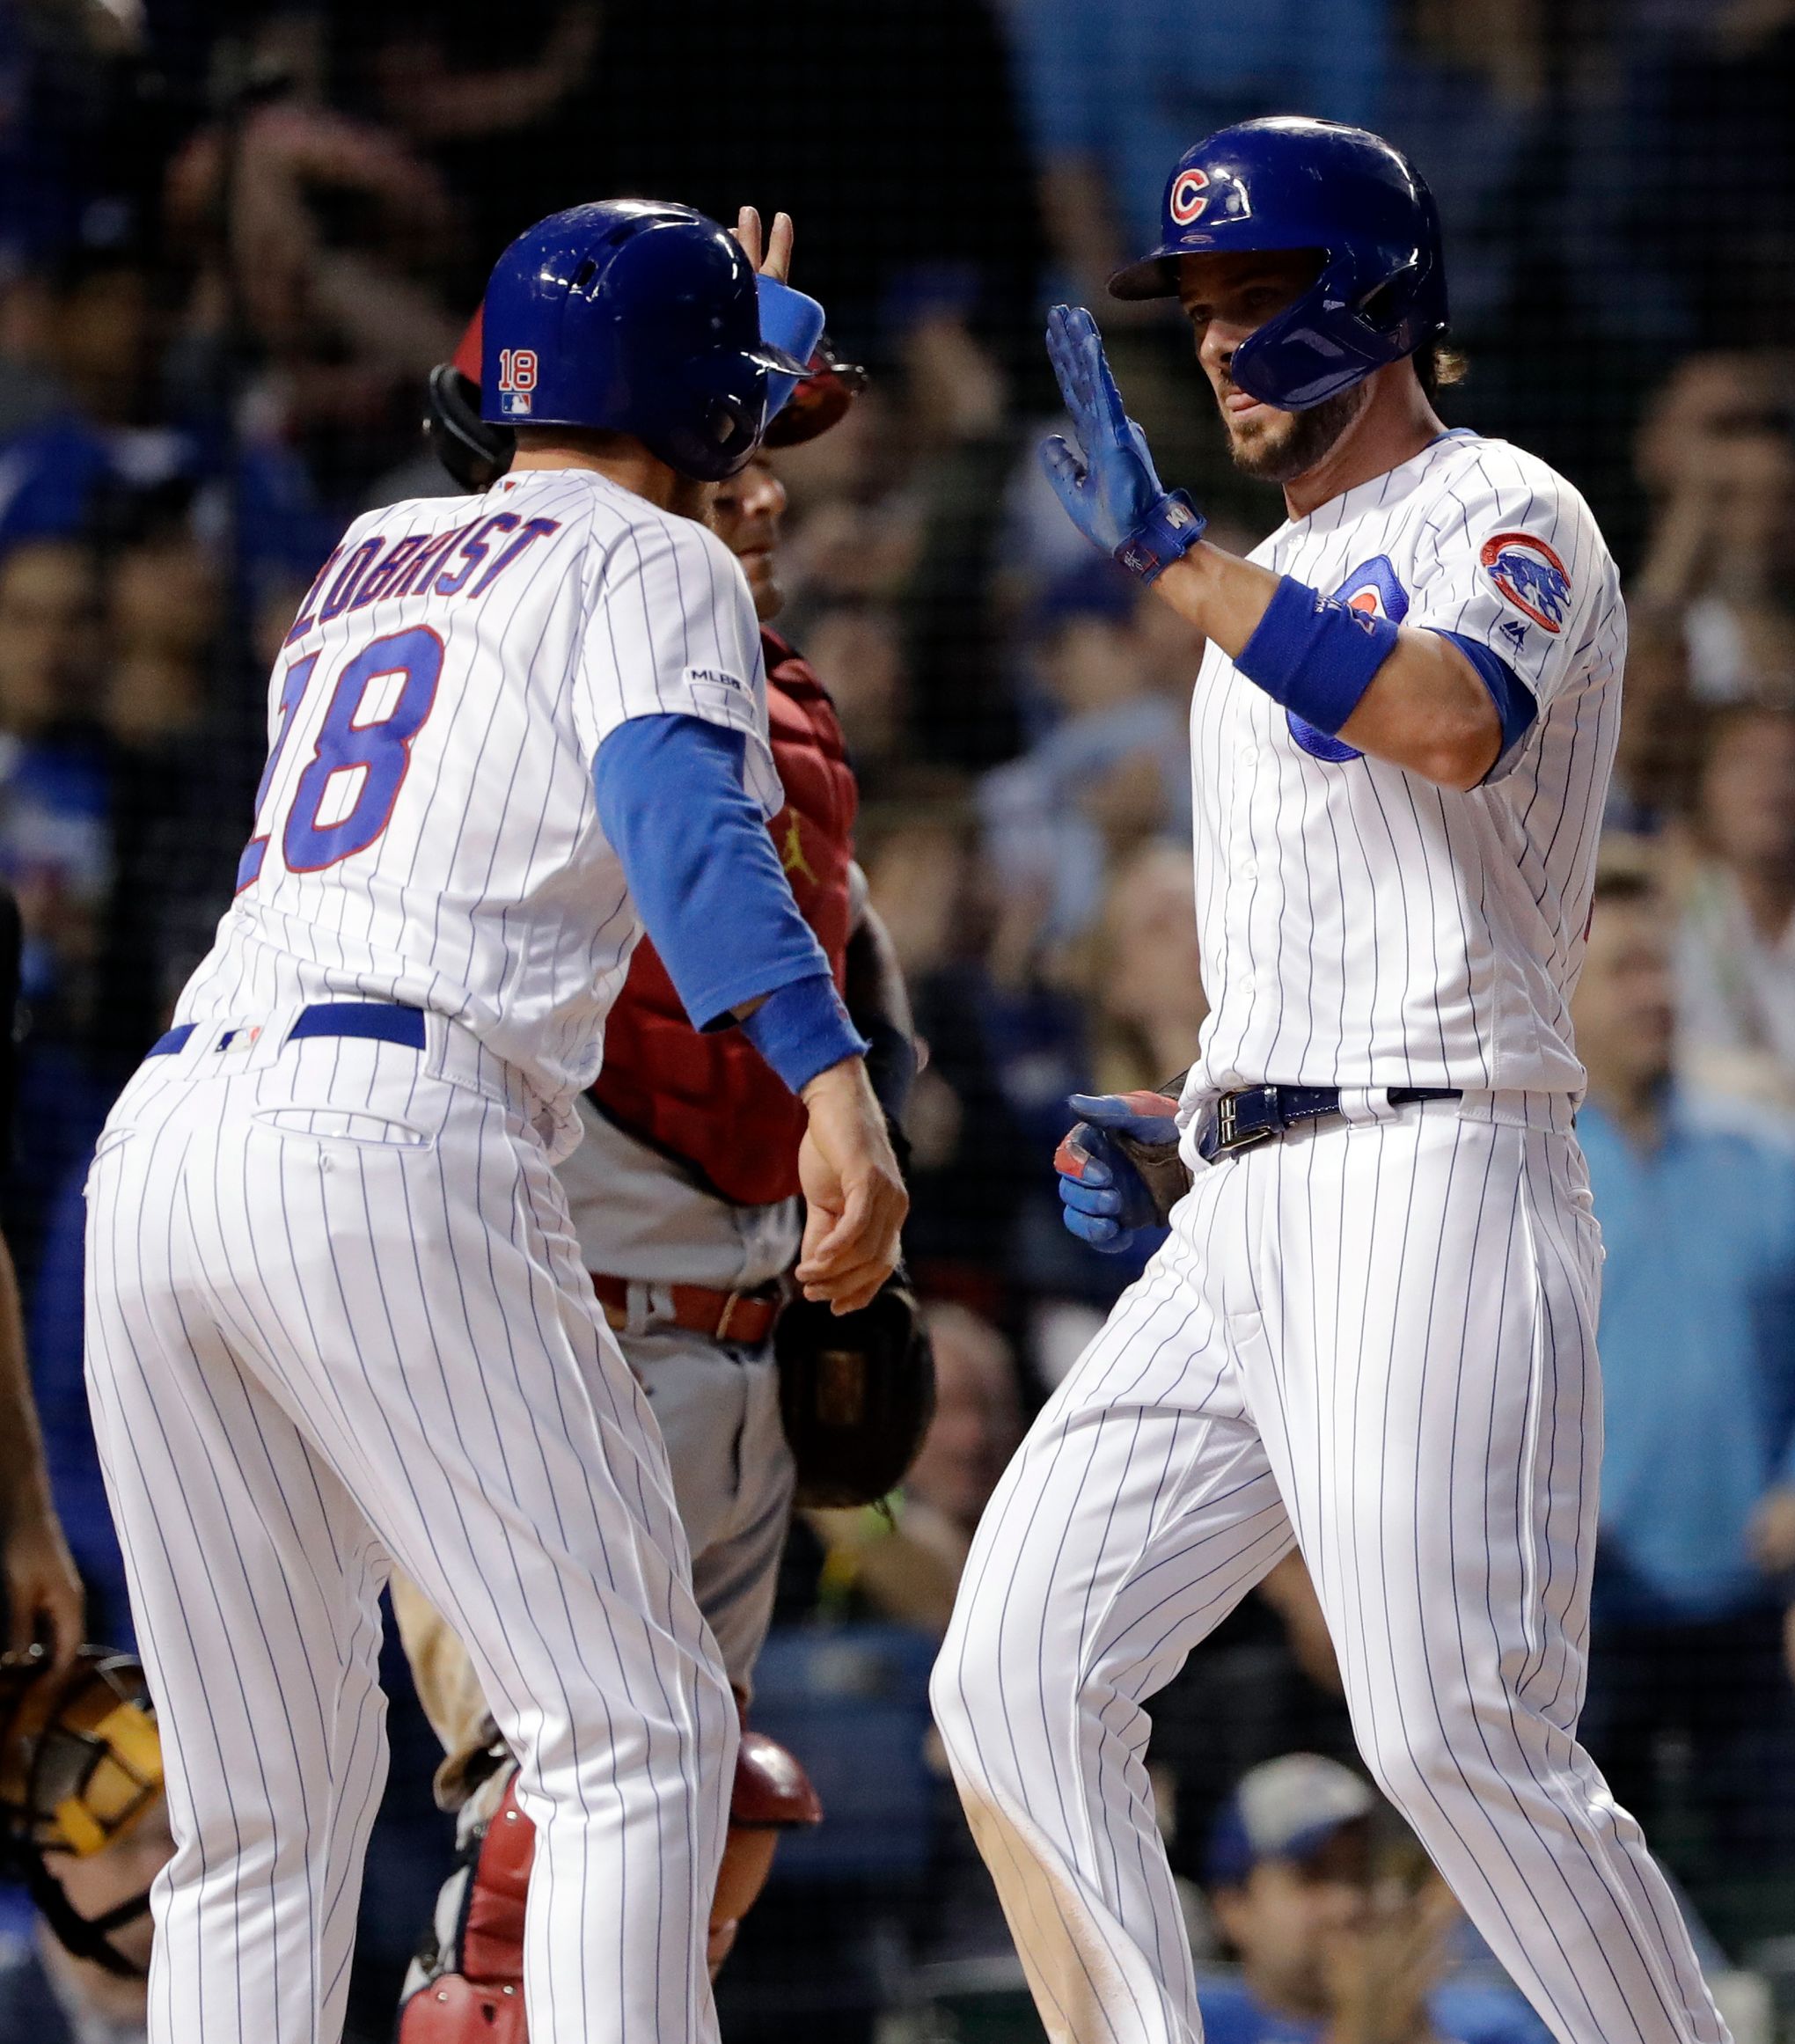 Cubs' Zobrist files for separation from wife